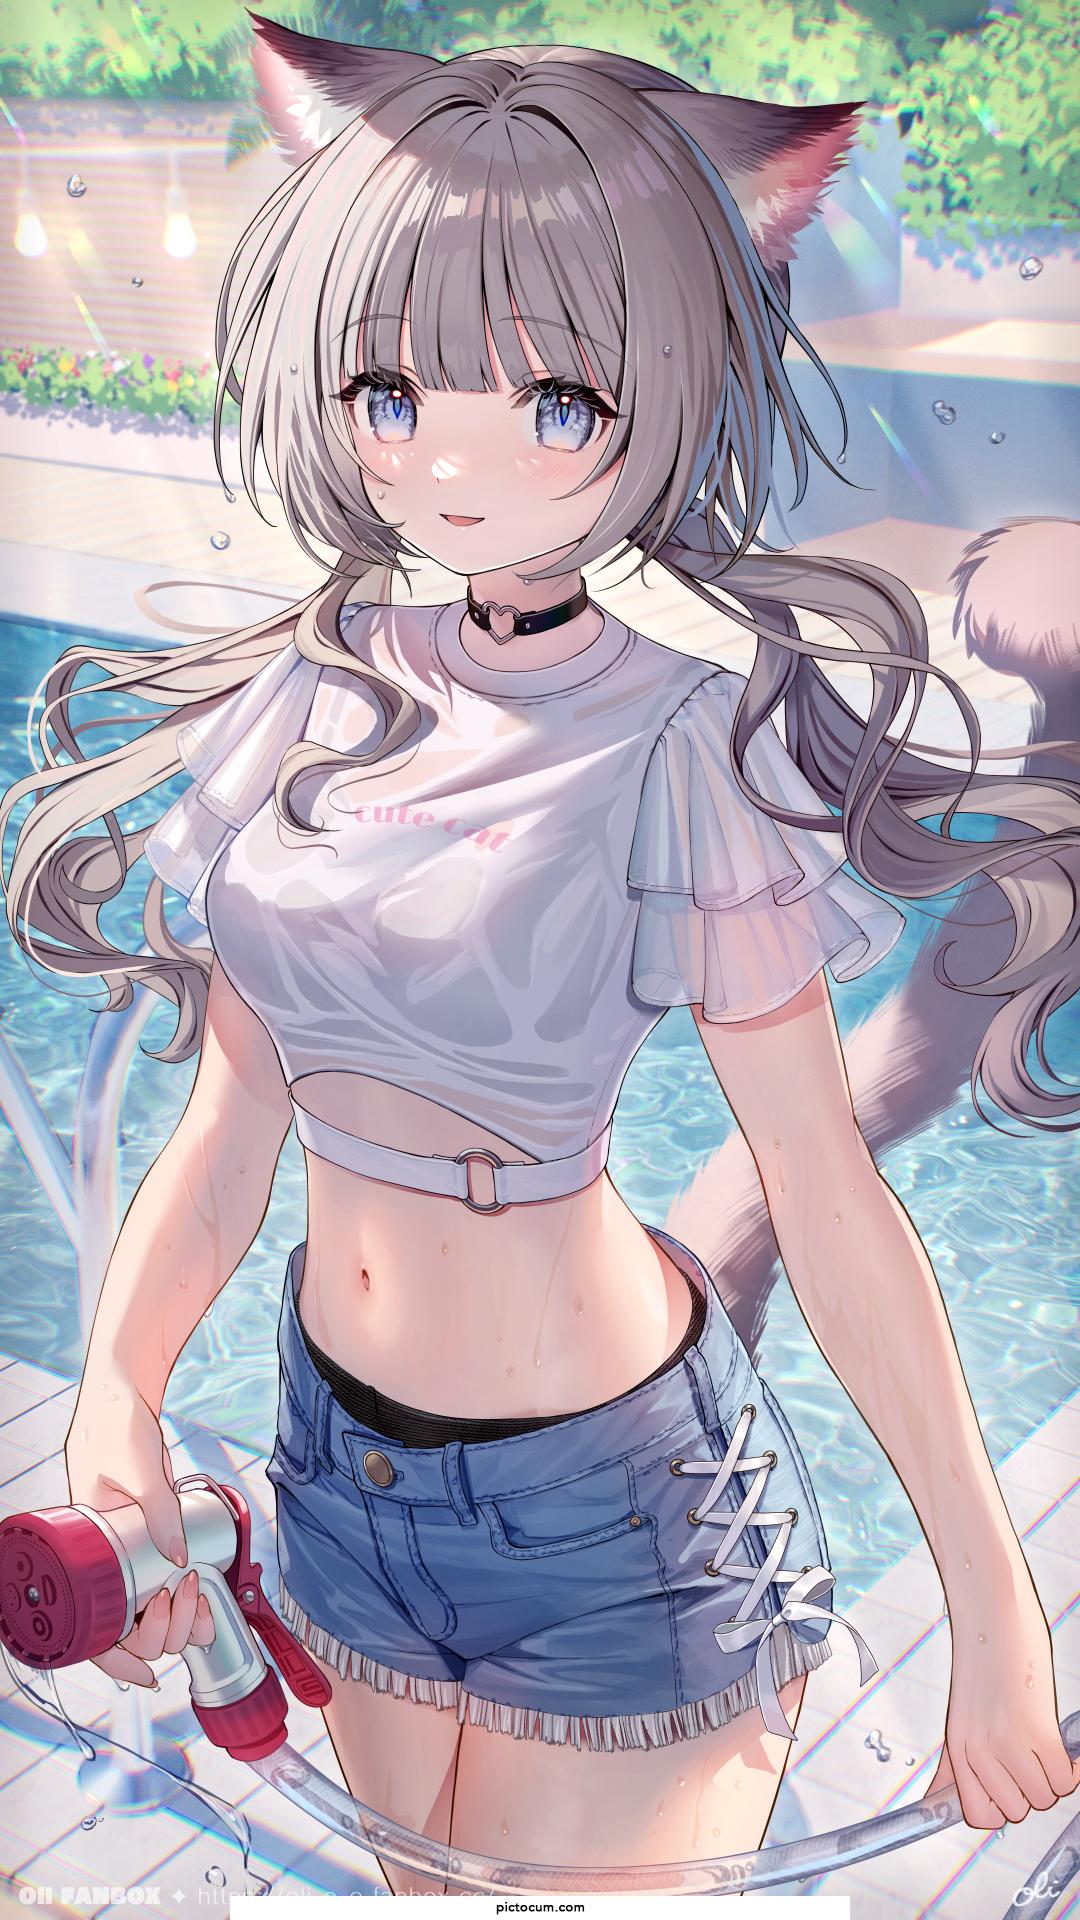 Cat girl by the pool